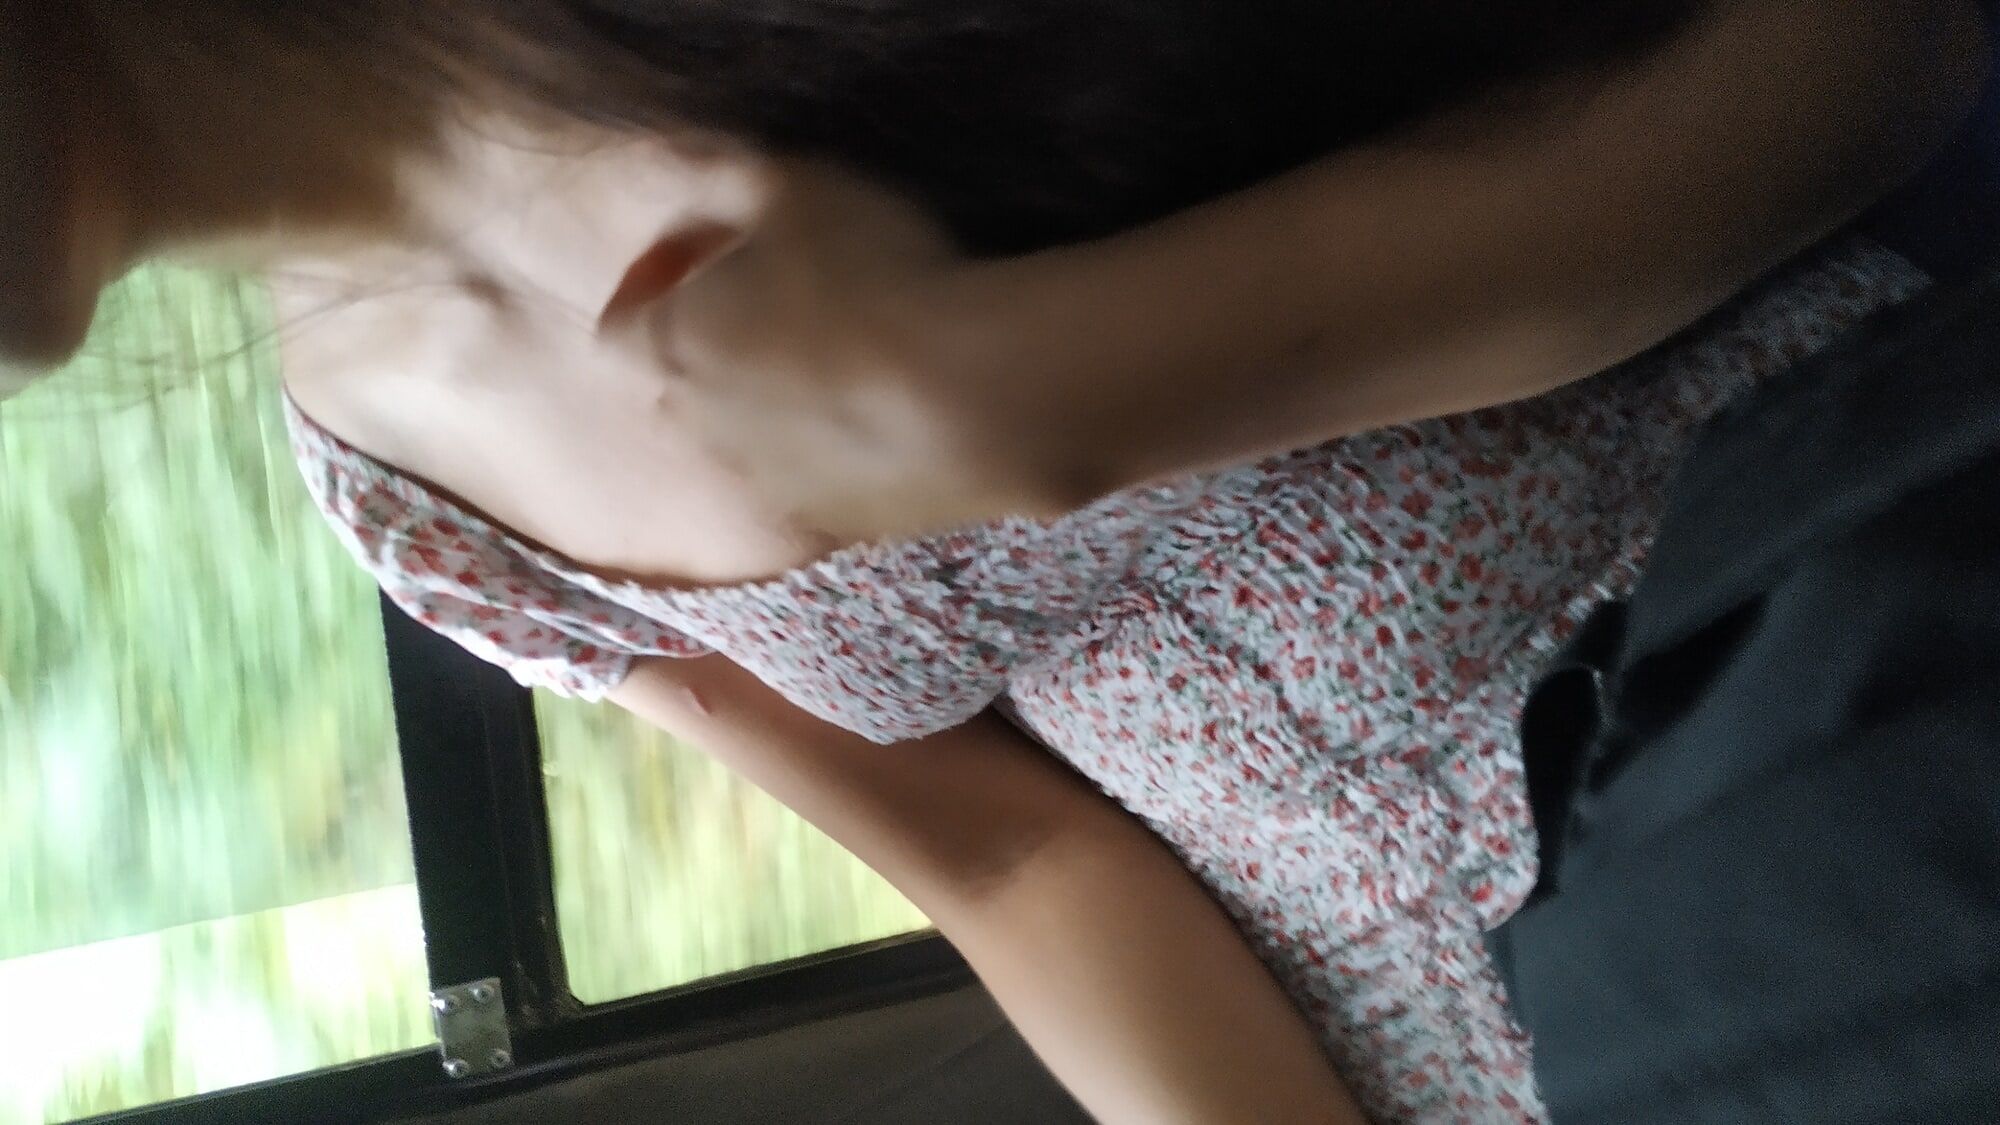 Feeling naughty in the bus